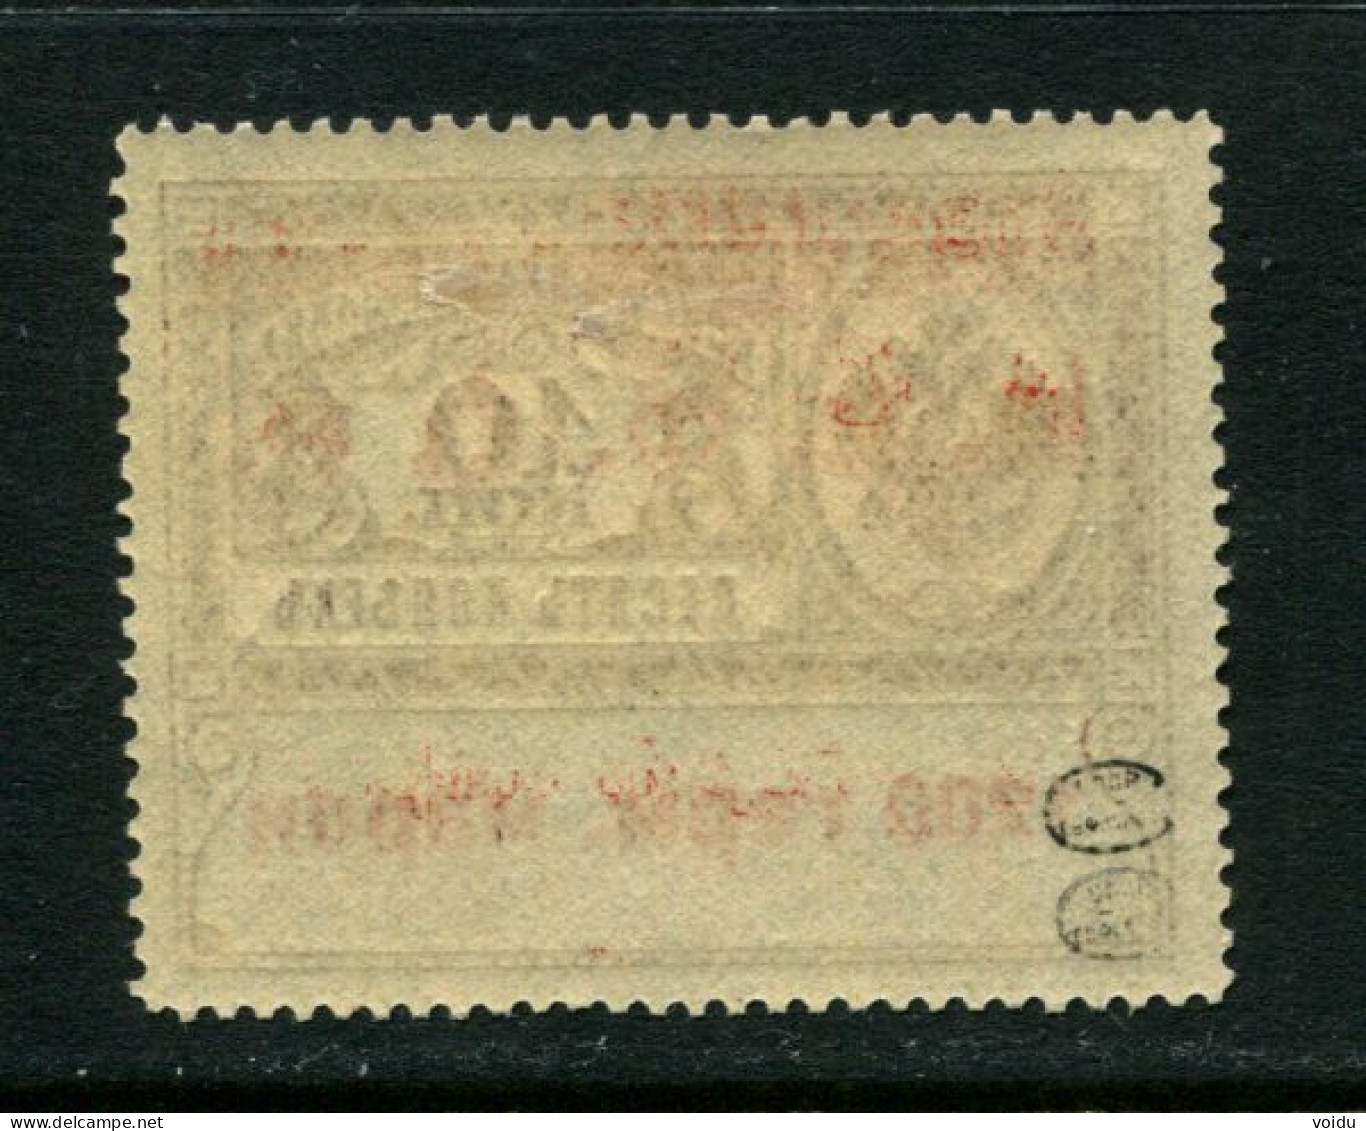 1922 1200 Germ Mark Consular Fee Stamp MlvH*, Airmail, RSFSR, Russia (Zag. Sl 9, Zv. C5, Type I, CV $1,000) - Unused Stamps